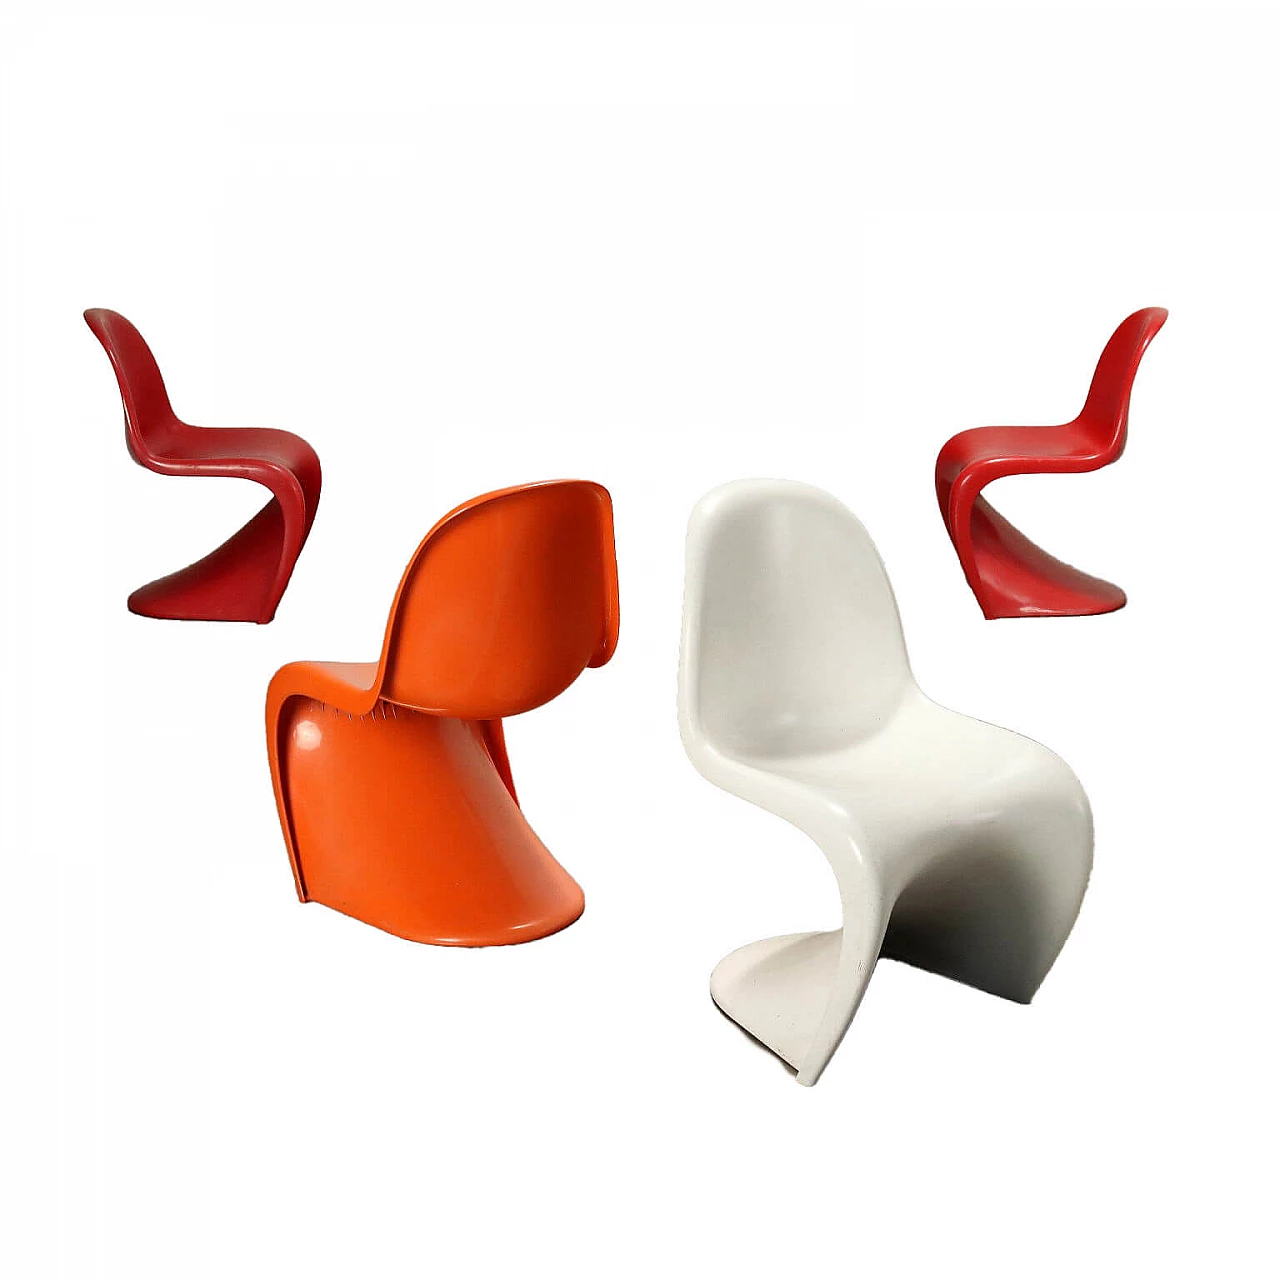 4 Panton chairs by Verner Panton for Vitra, 1960s 1